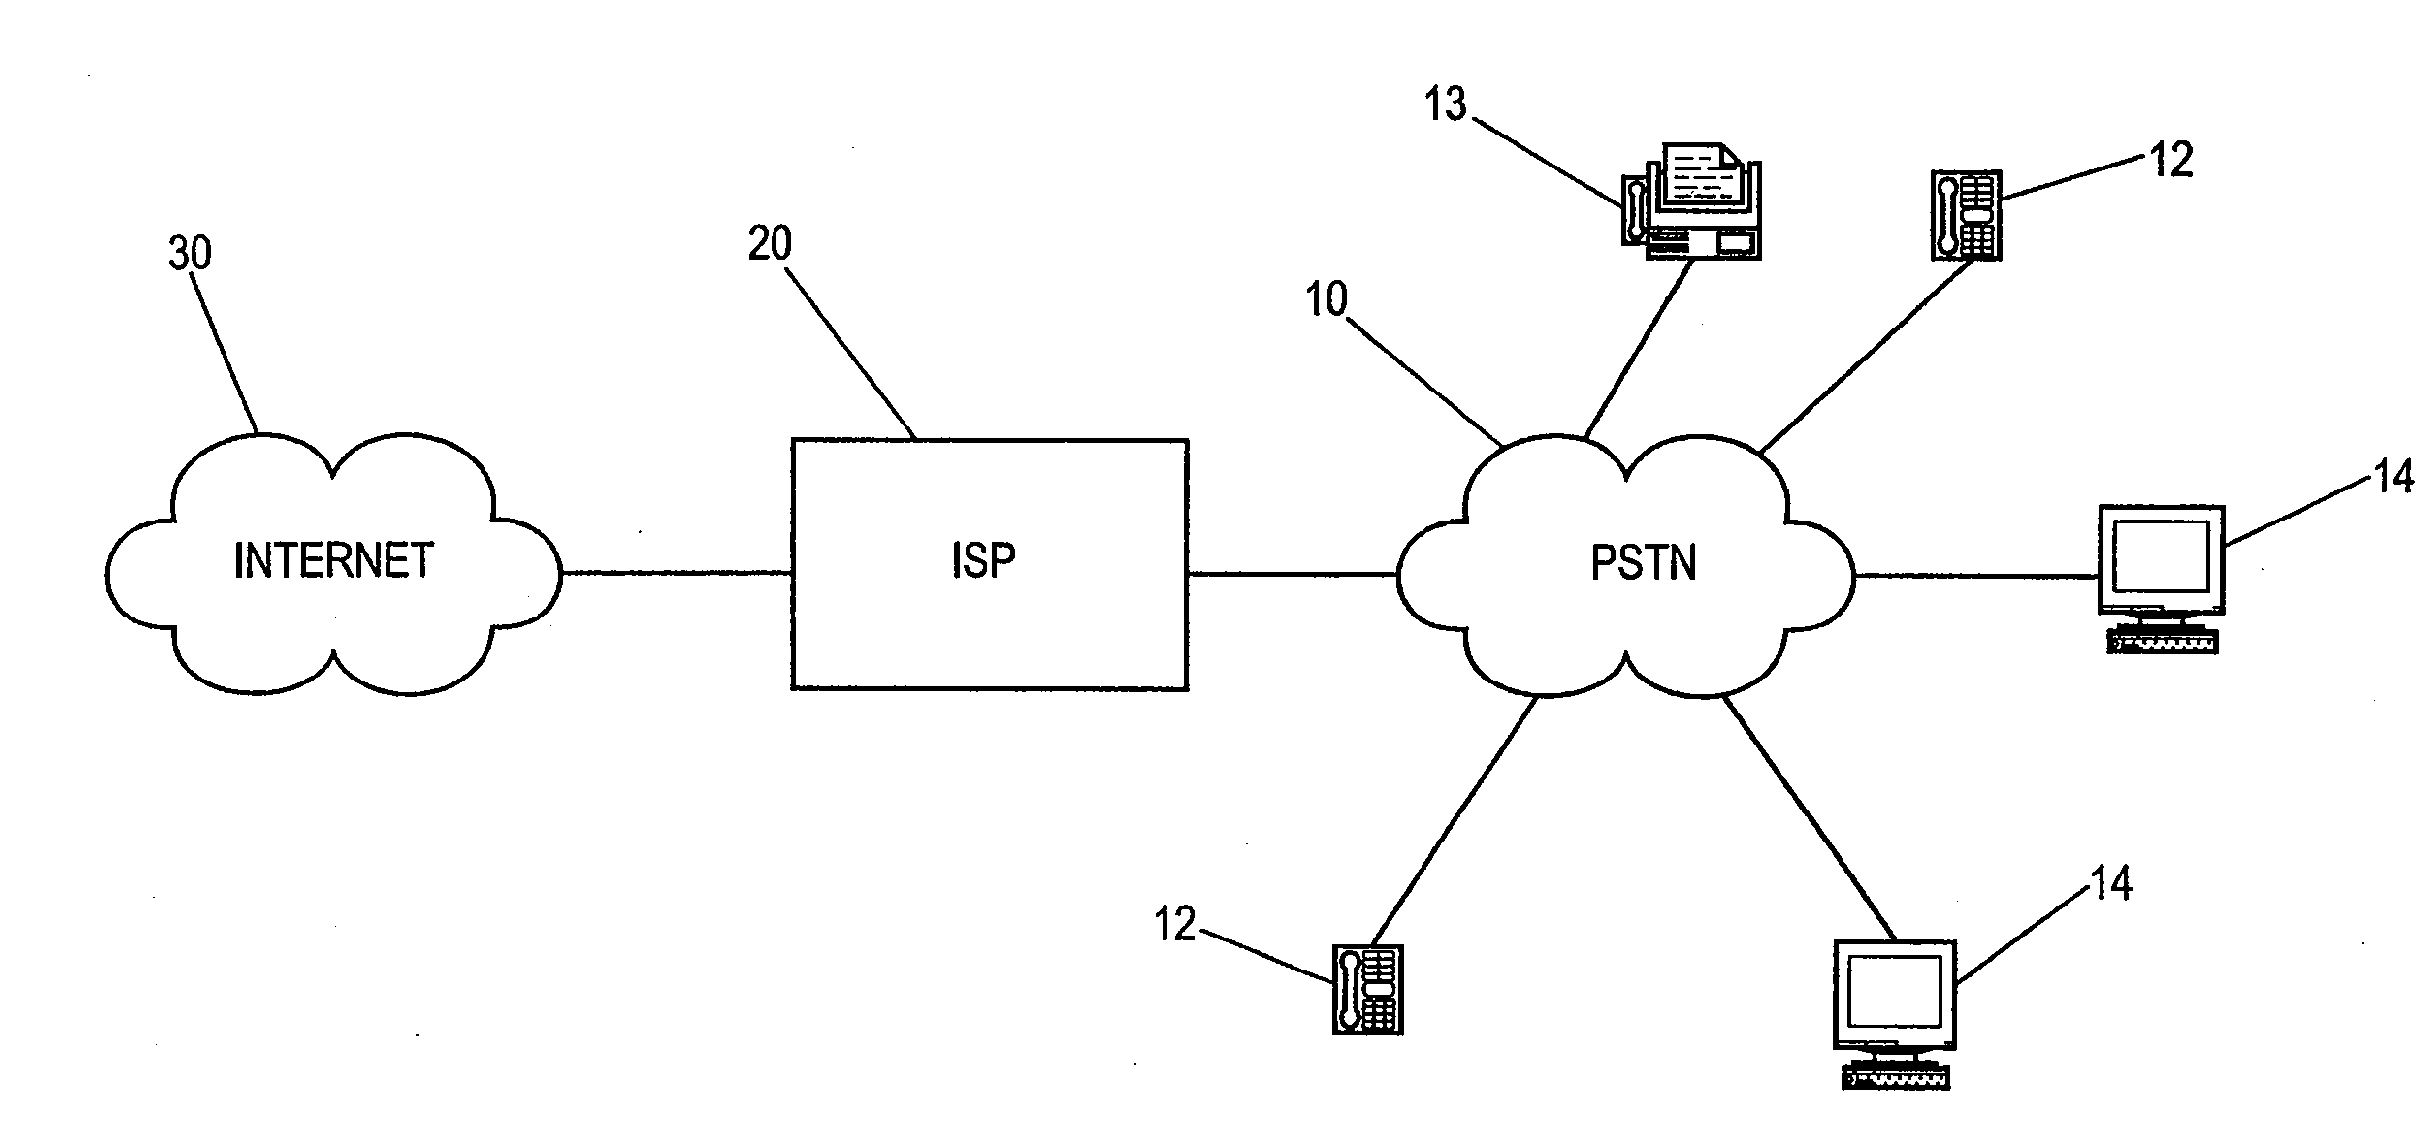 Networks, Systems and Methods for Routing Data Traffic Within a Telephone Network Based on Available Resources